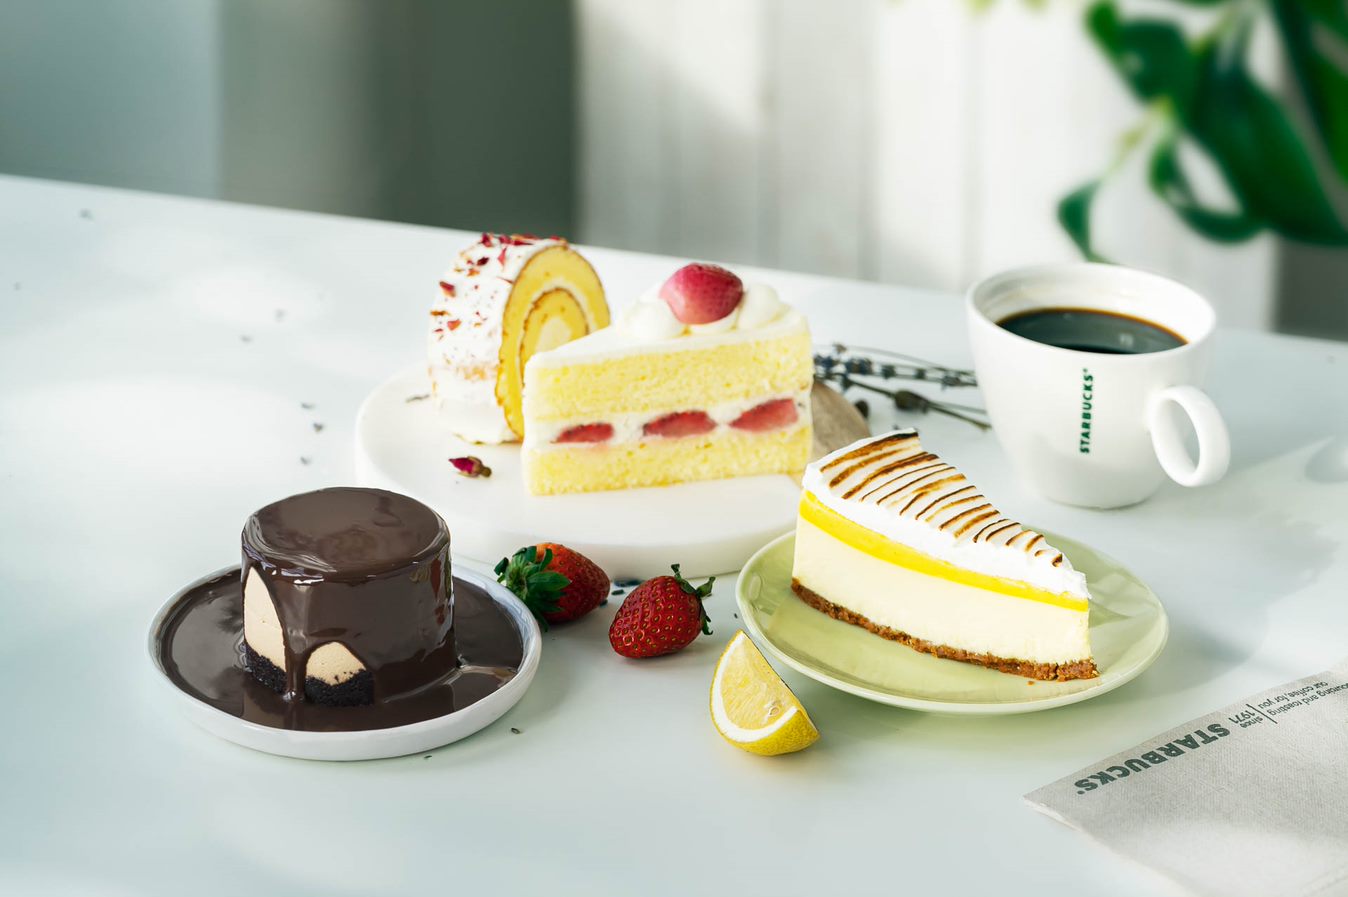 Starbucks Introduces New Cakes And Savory Treats To Fall In Love With |  Metro.Style